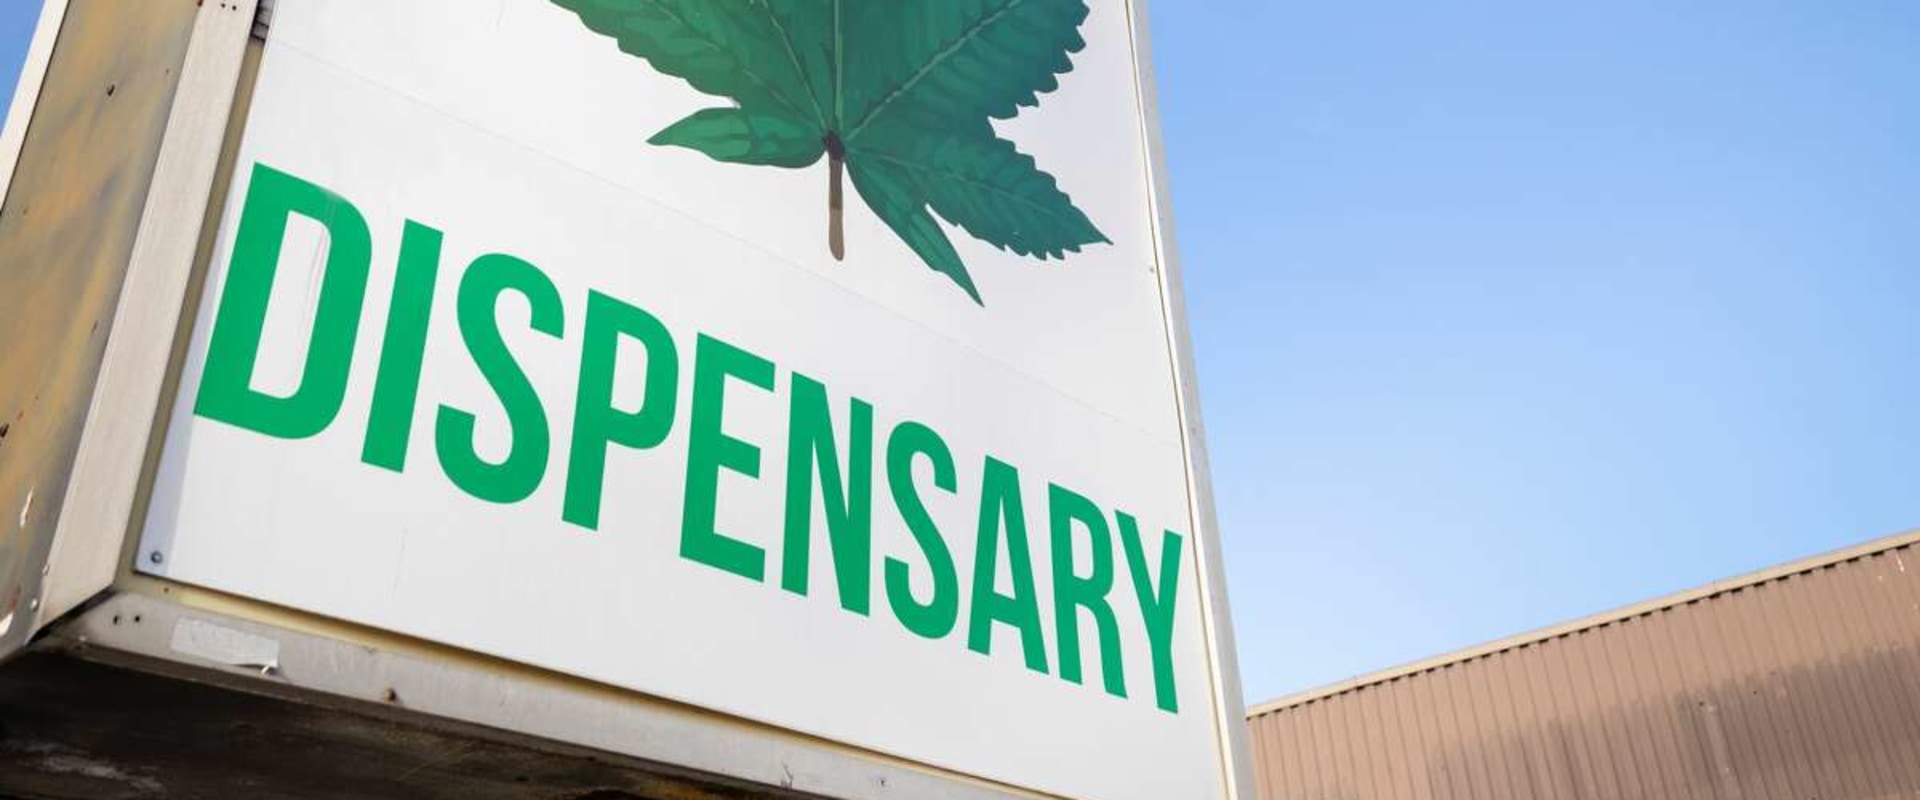 How are dispensaries legal?